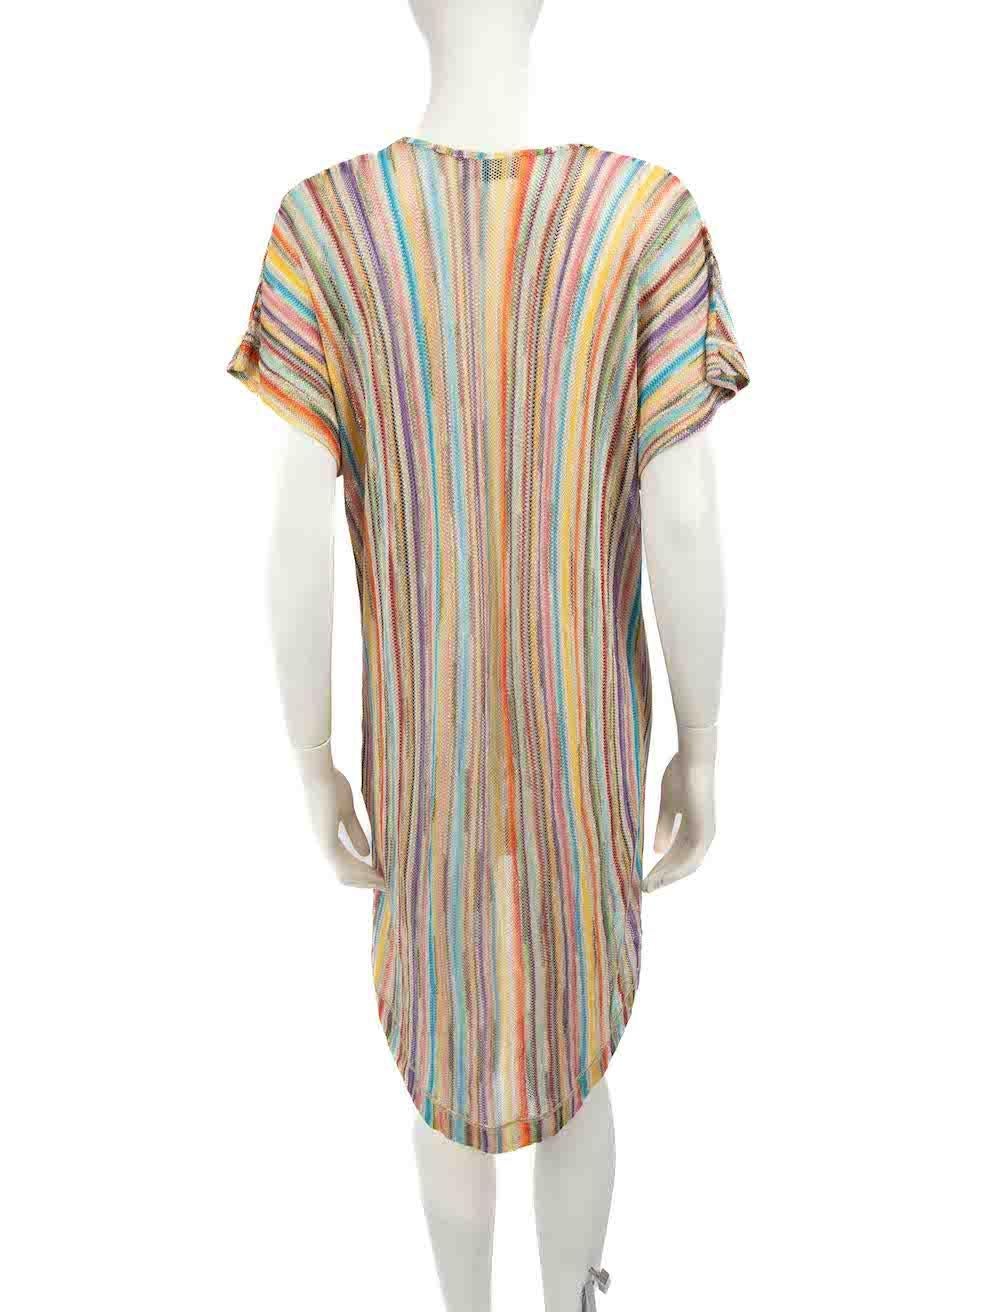 Missoni Missoni Mare Striped Pattern Knitted Beach Dress Size L In Good Condition For Sale In London, GB